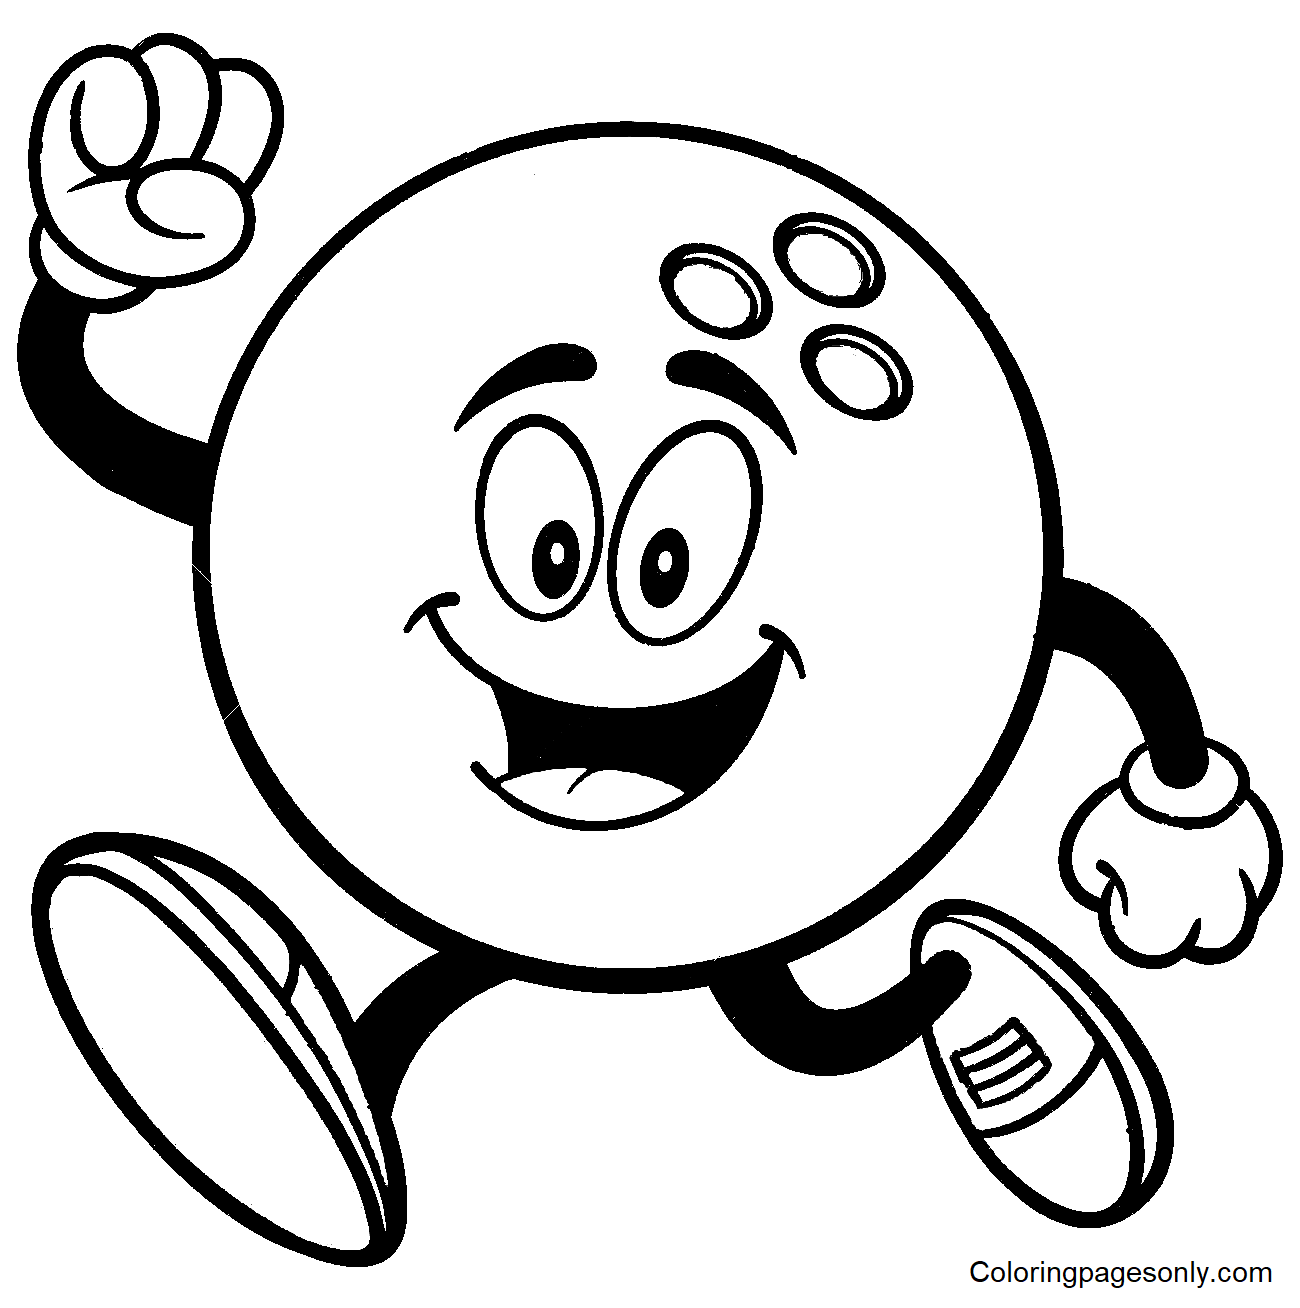 Bowling Ball Running Coloring Page